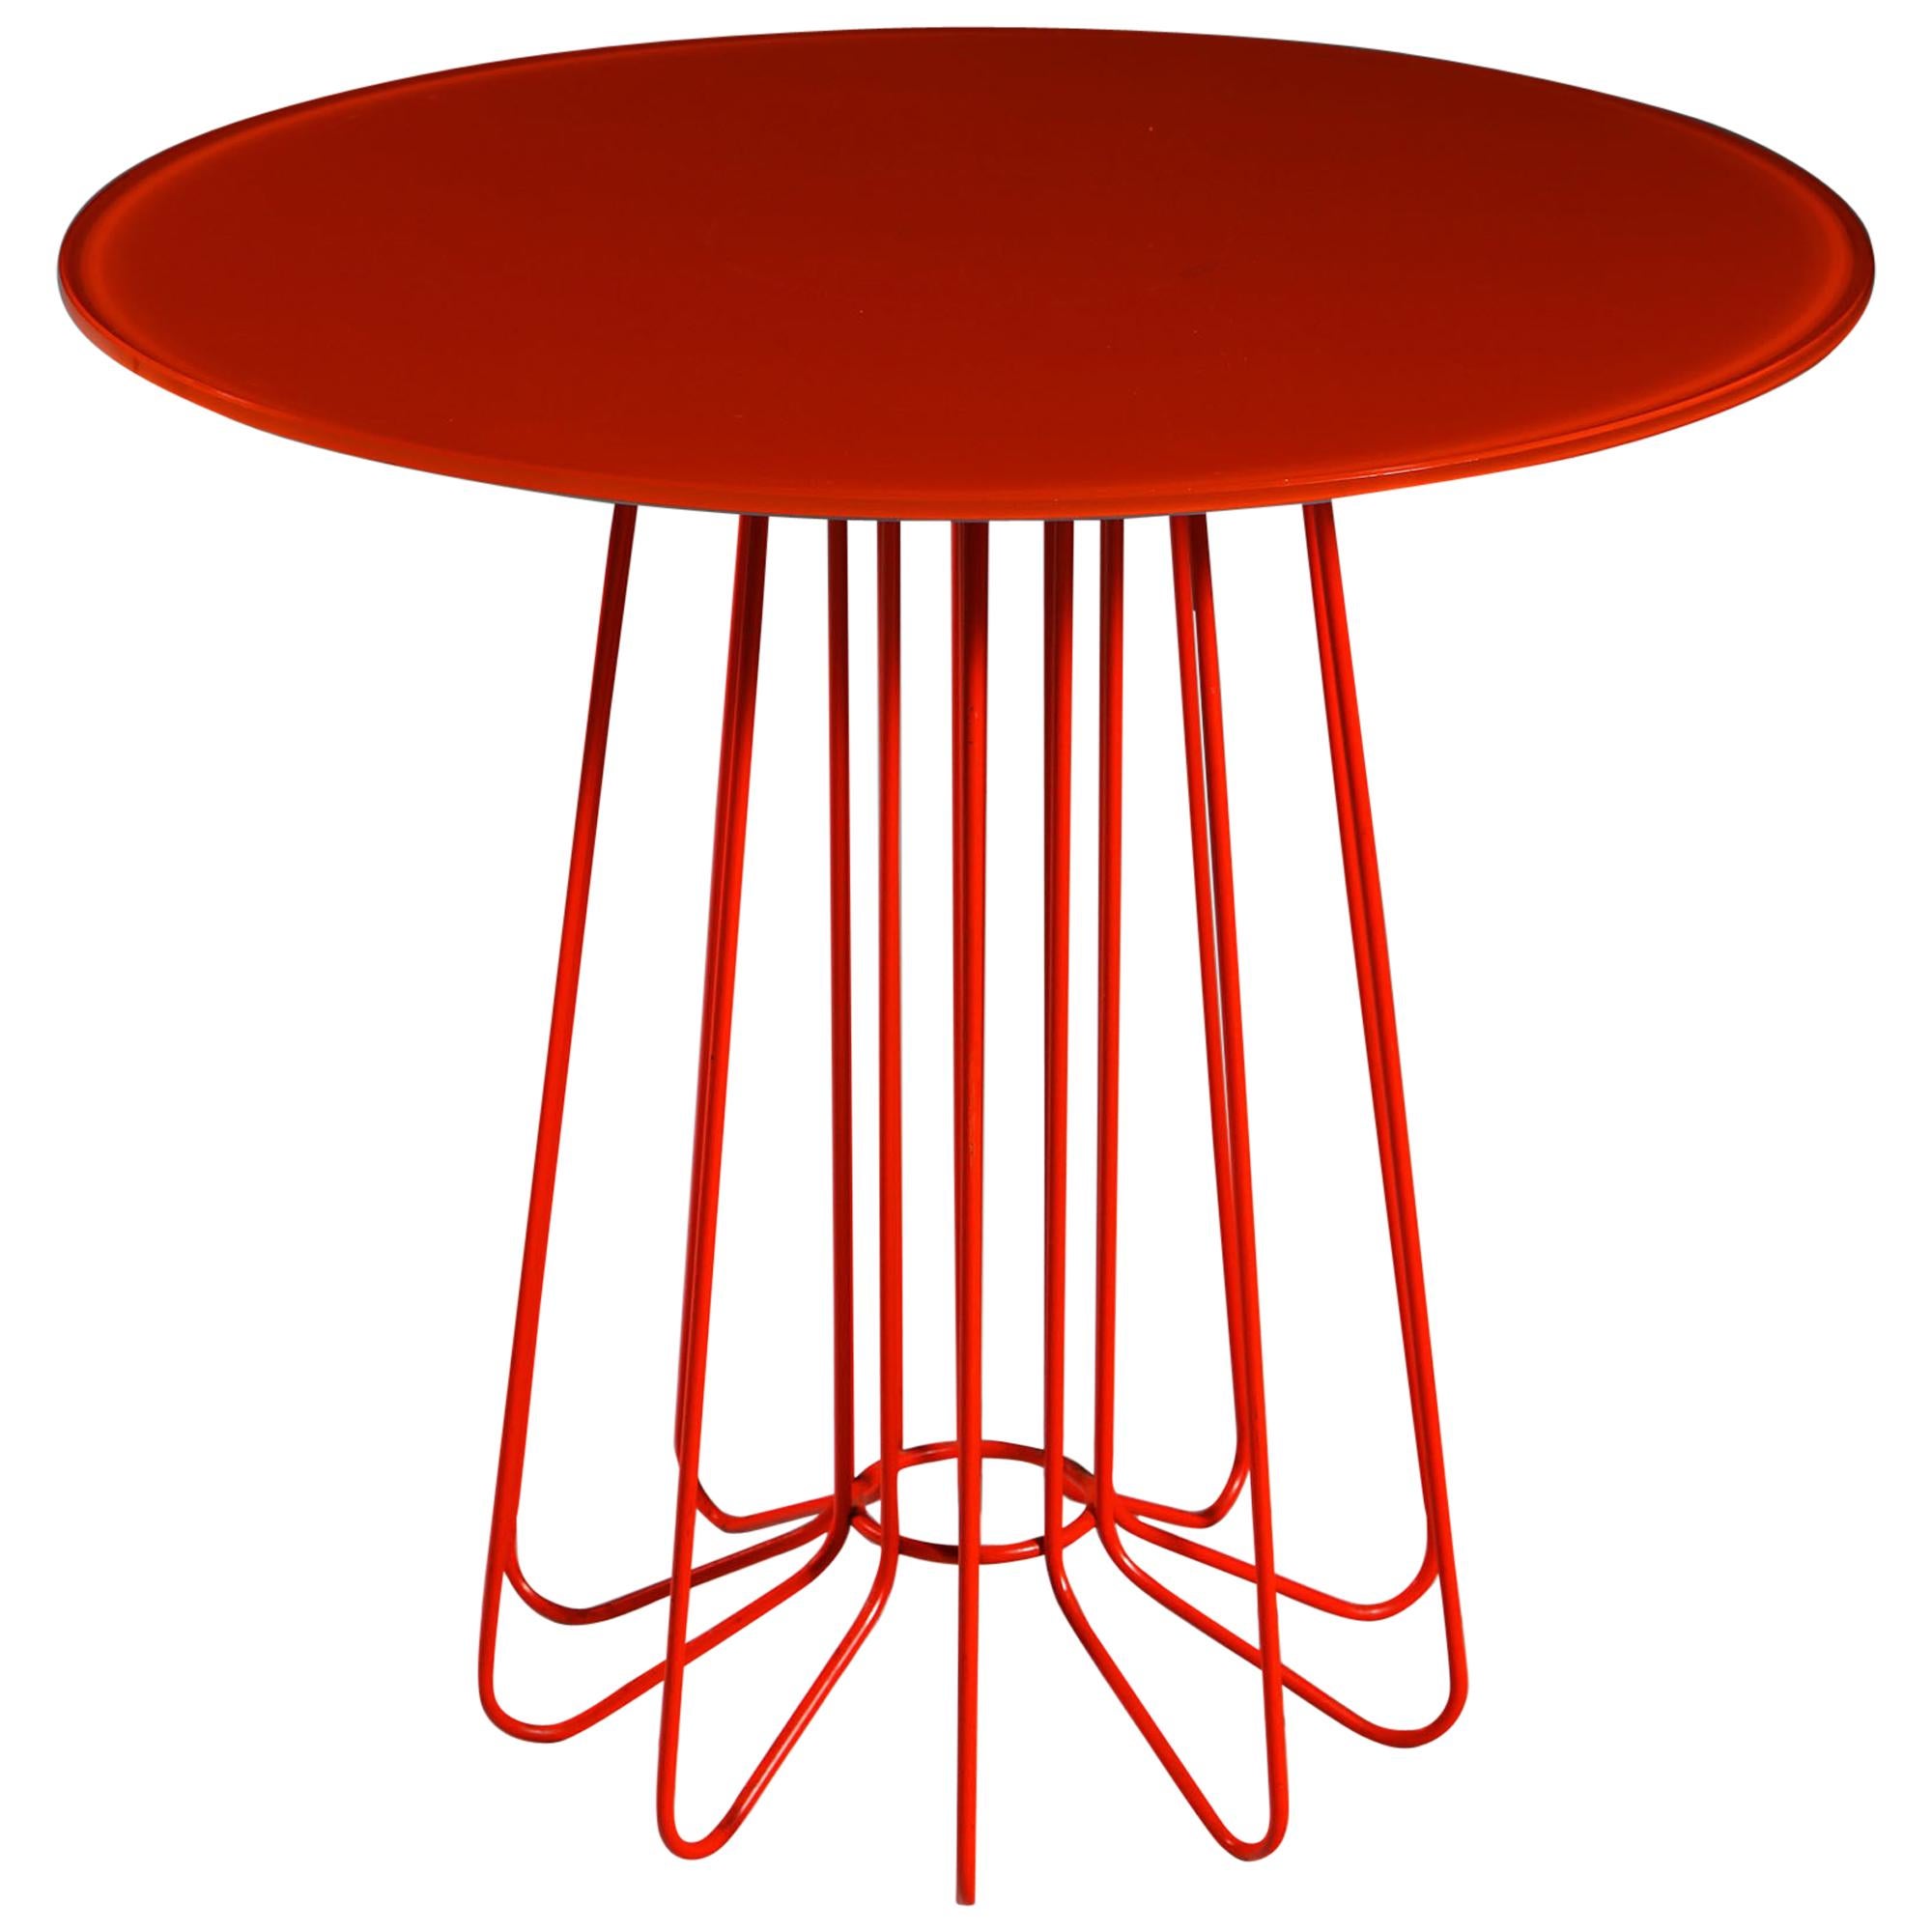 Orange Smallwire Table by Arik Levy for Zanotta, Stamped